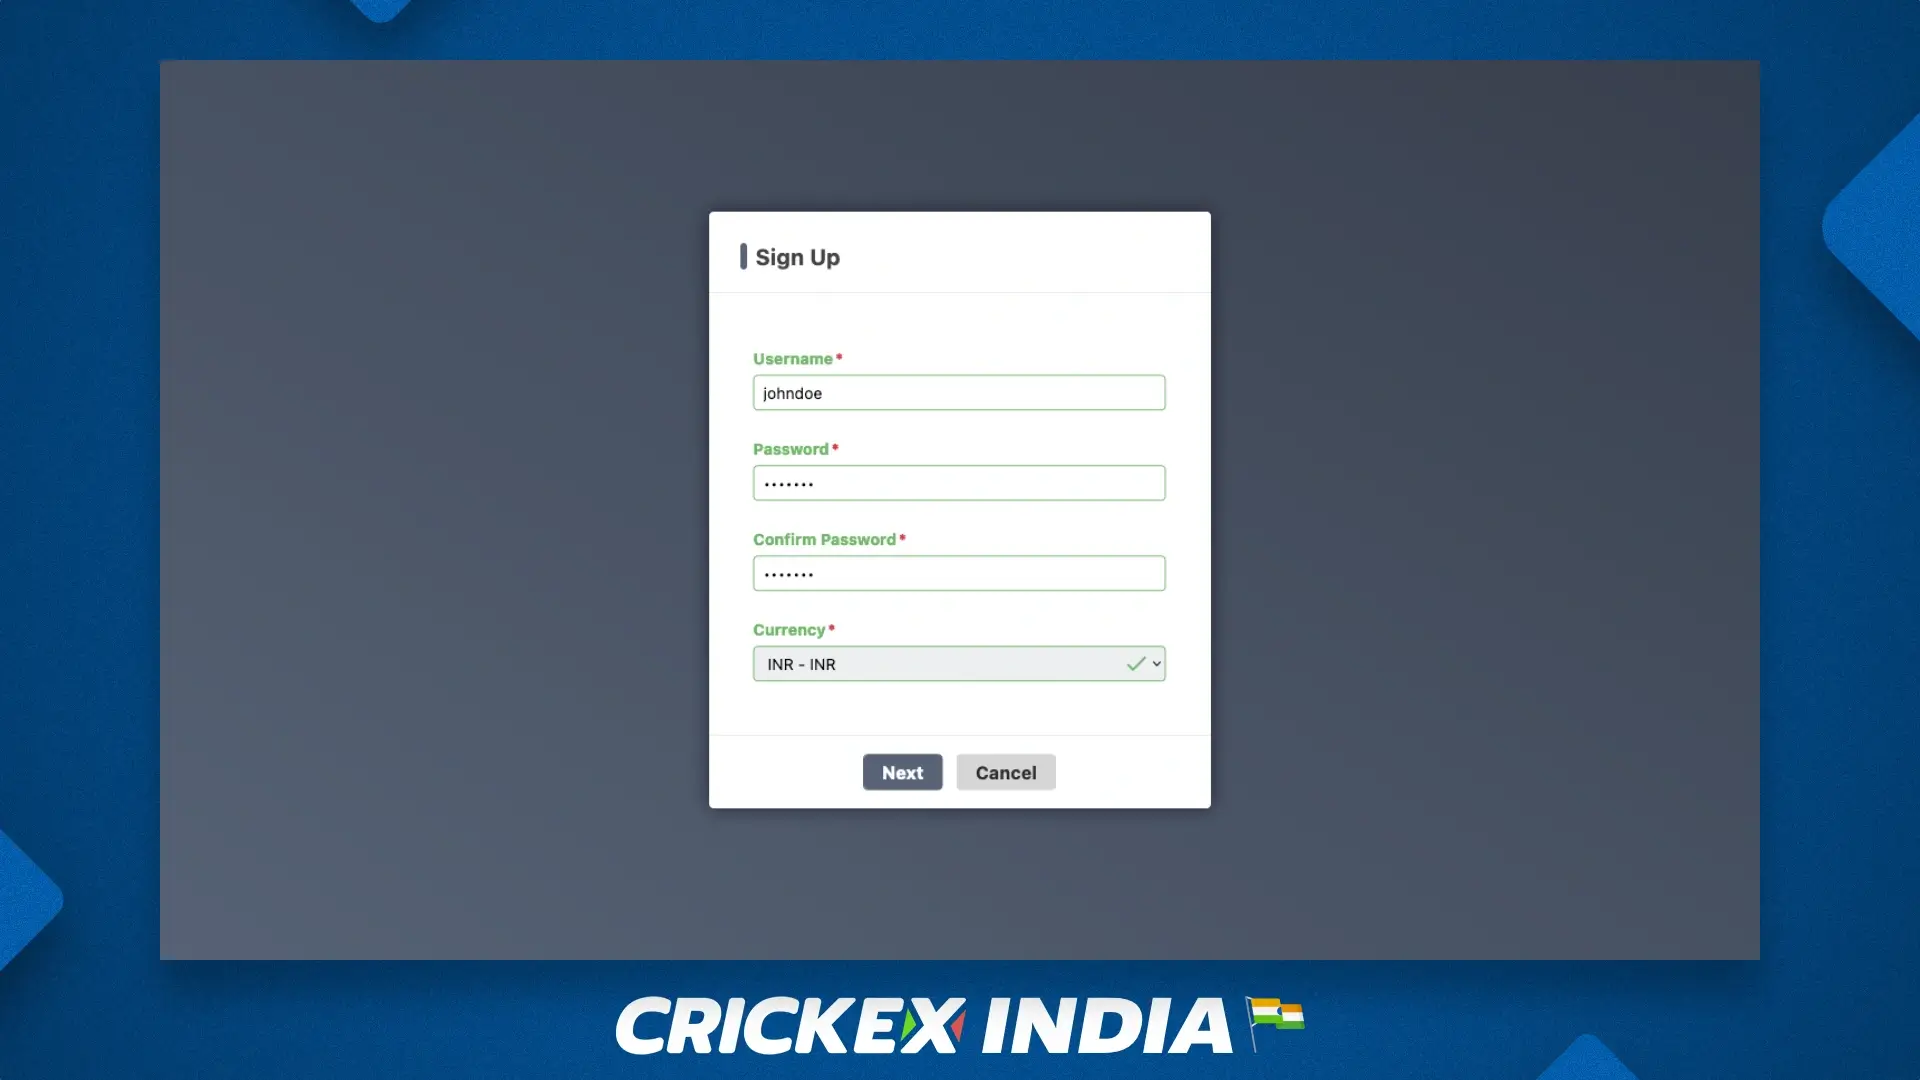 Registration in the Crickex affiliate program for users from India and Bangladesh